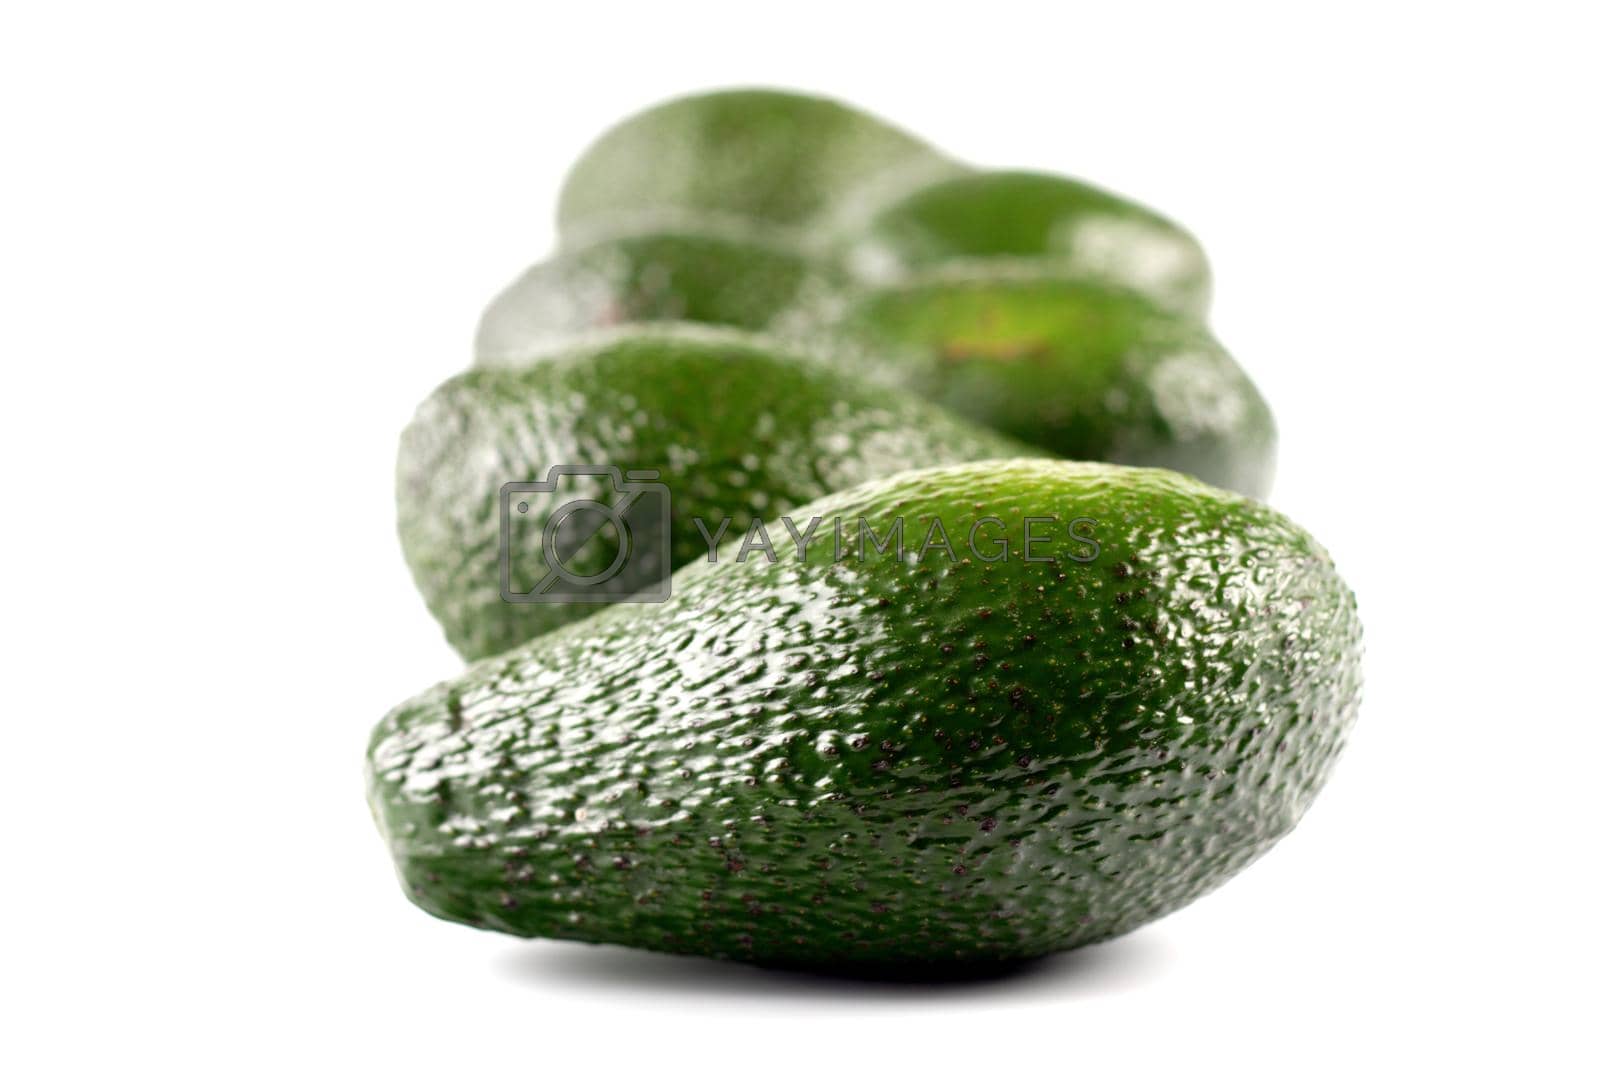 Royalty free image of Avocado by moodboard